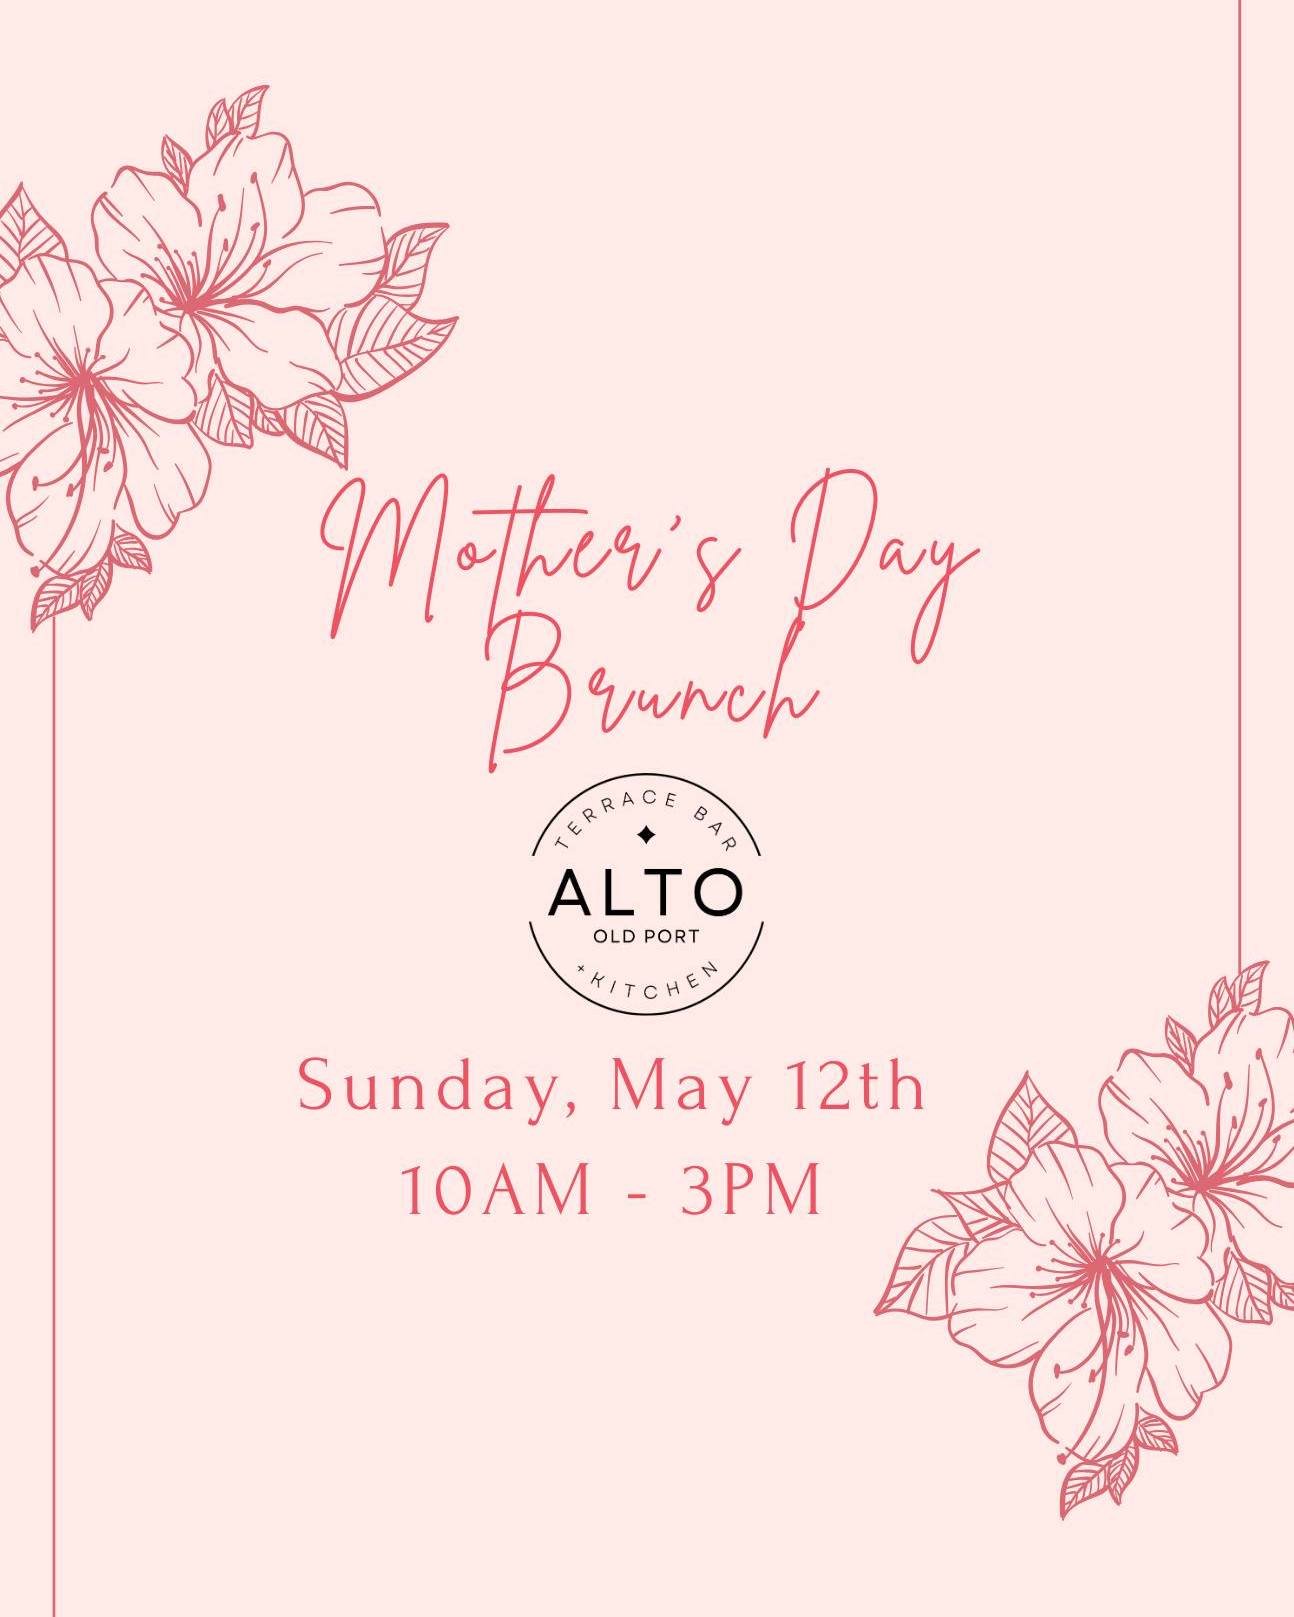 🌸 Treat Mom to an unforgettable Mother's Day Brunch at ALTO Terrace Bar + Kitchen! 🌸

Join us on Sunday, May 12th, as we celebrate the wonderful mothers in our lives with a delightful brunch experience.

Indulge in our exquisite brunch buffet from 